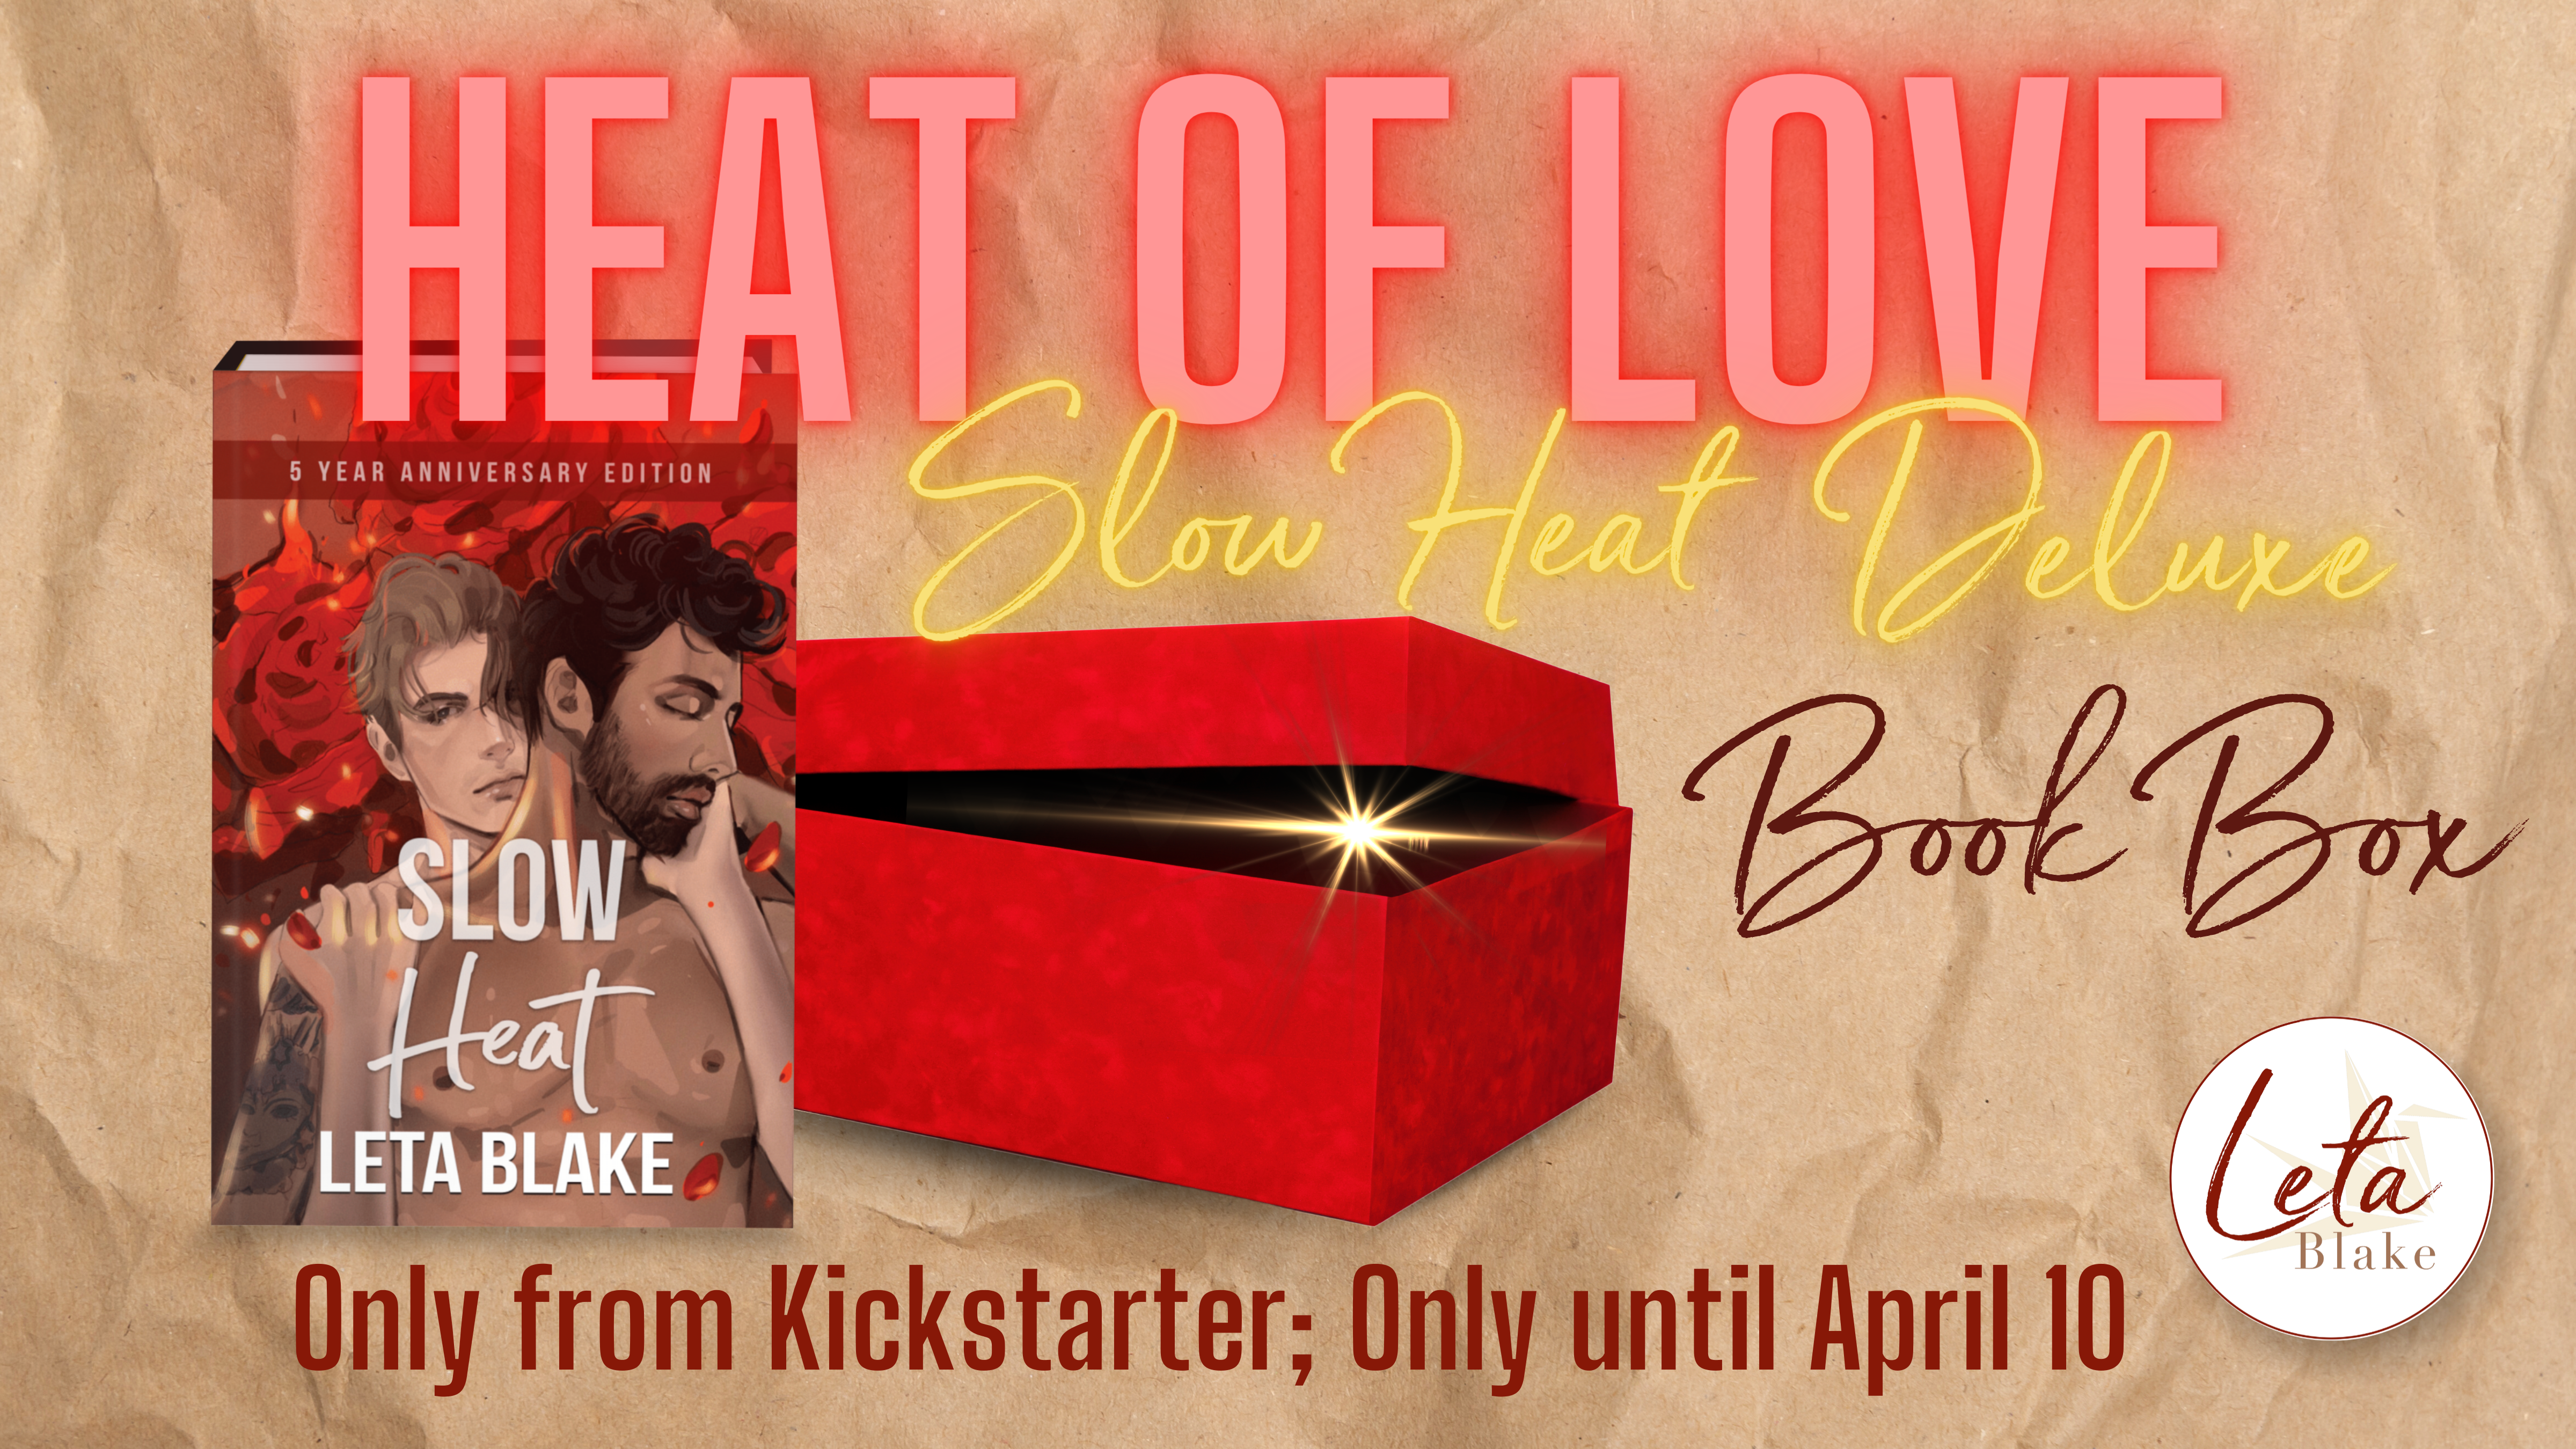 Image is a hardcover "Slow Heat" book beside a red box on a brown paper wrapping background. Box is partially open and a shiny star of light is peeking out. Text says "Heat of Love", "Slow Heat Deluxe Book Box" and "Only from Kickstarter; Only until April 10"